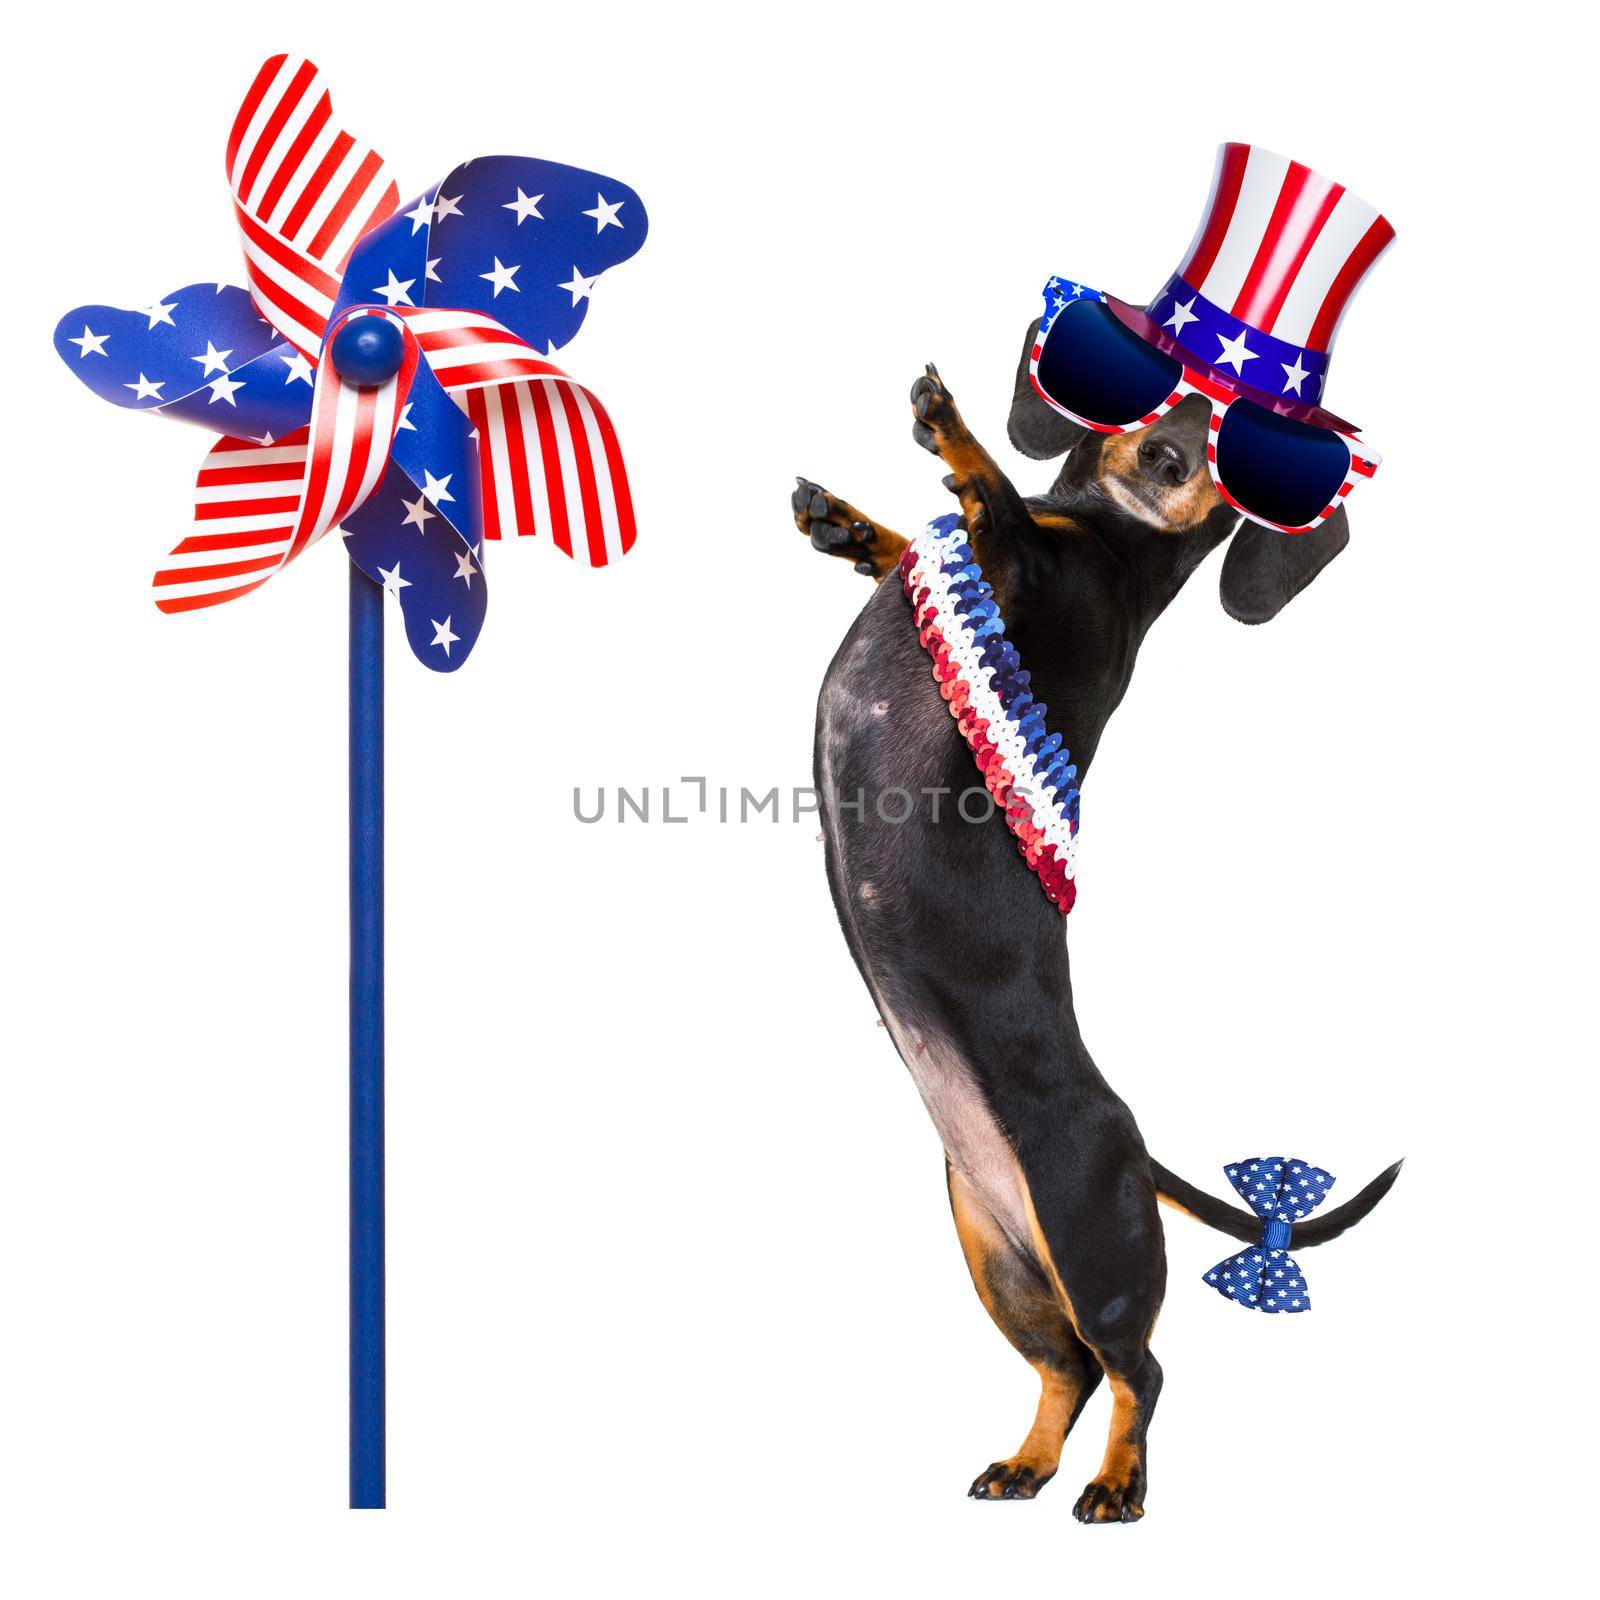 dachshund susage dog waving a flag of usa and victory or peace fingers on independence day 4th of july, isolated on white background